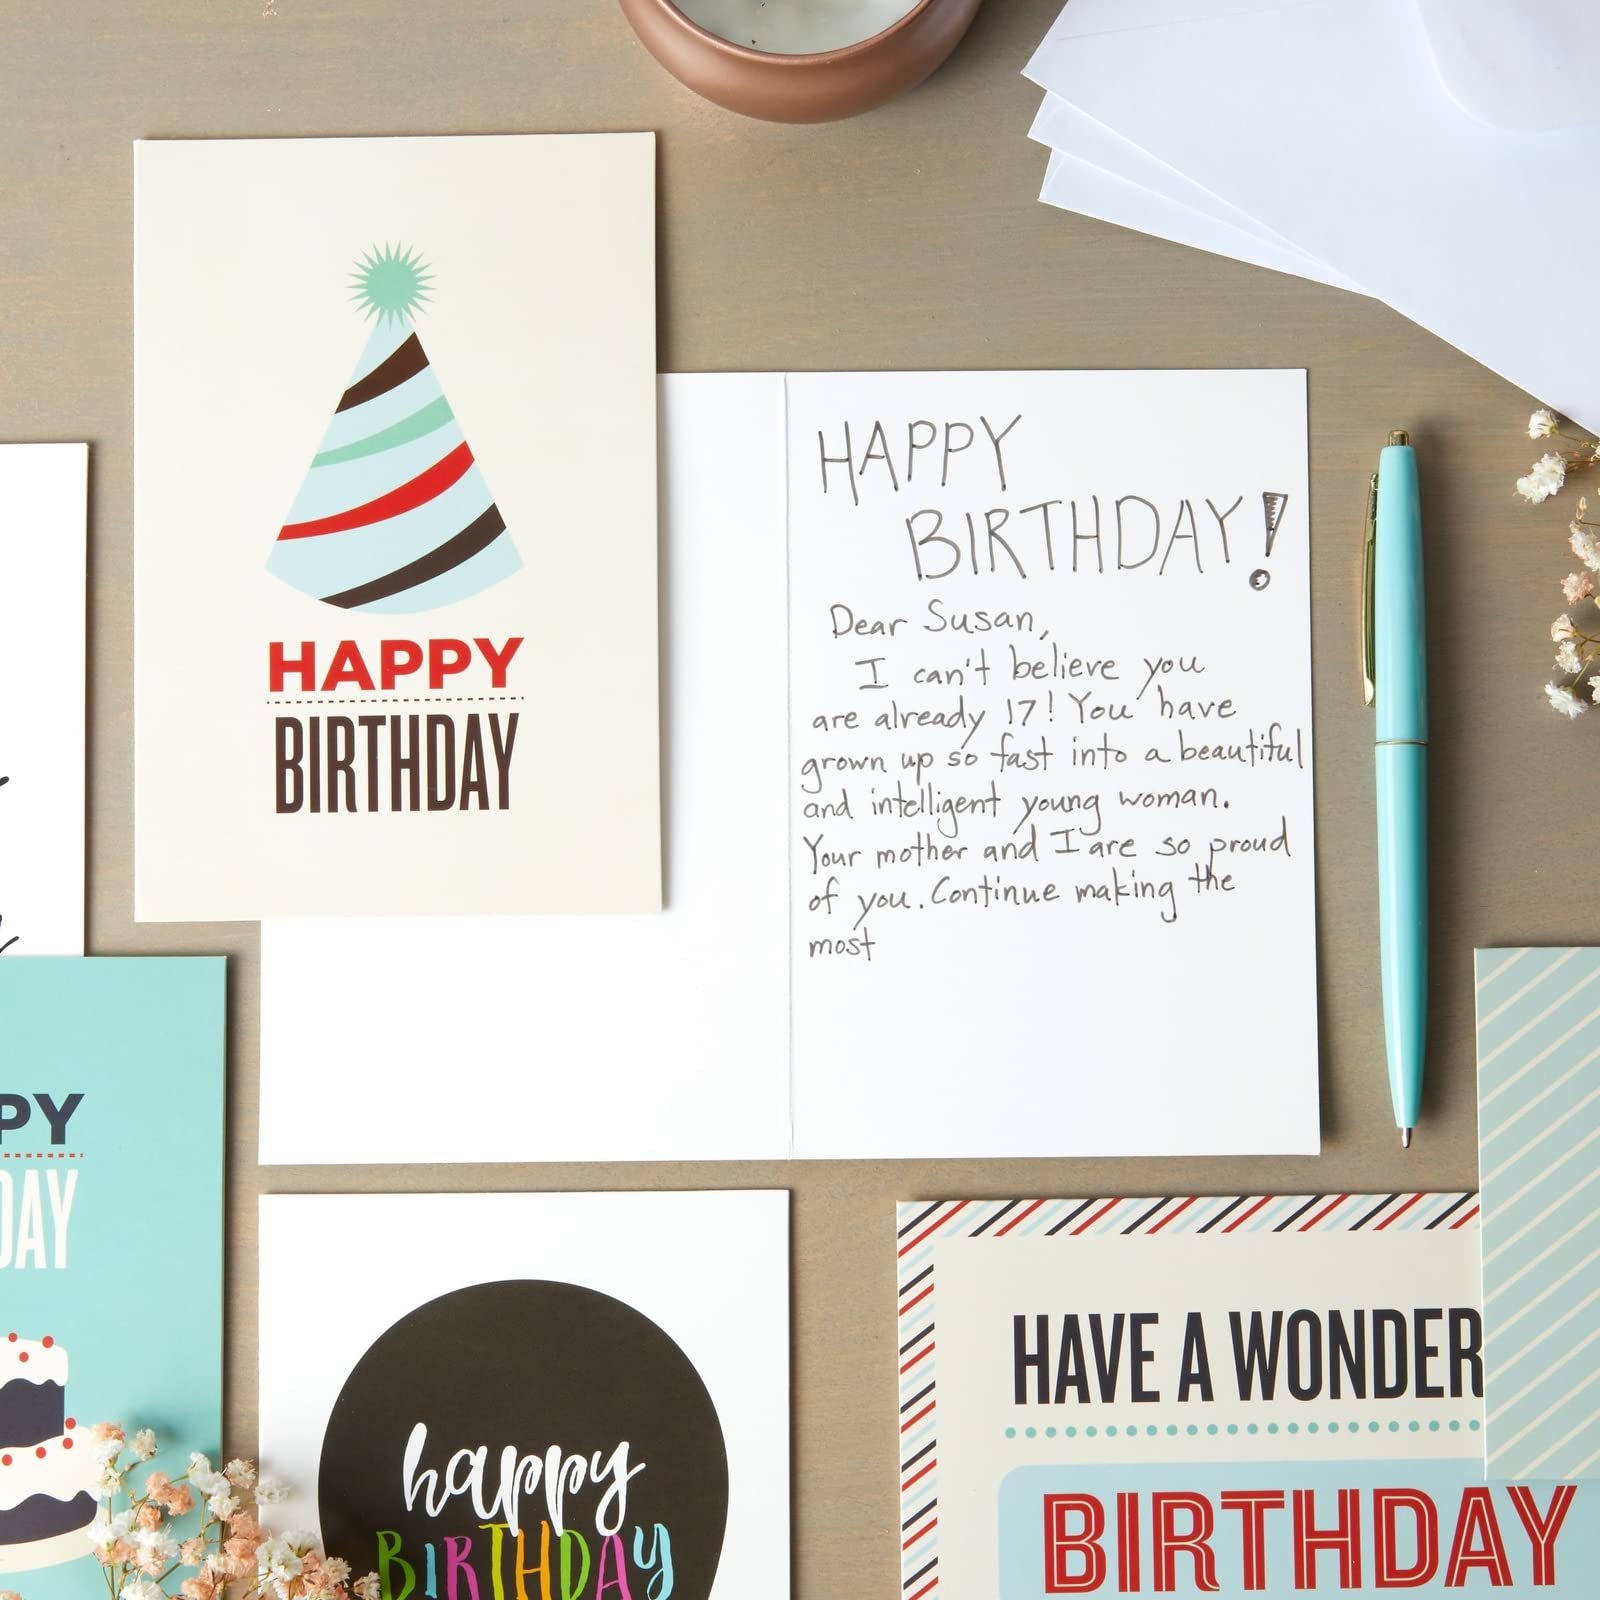 120 Pack Assorted Birthday Greeting Cards with Envelopes, 12 Designs, Blank Inside, Bulk Boxed Set (4x6 In)